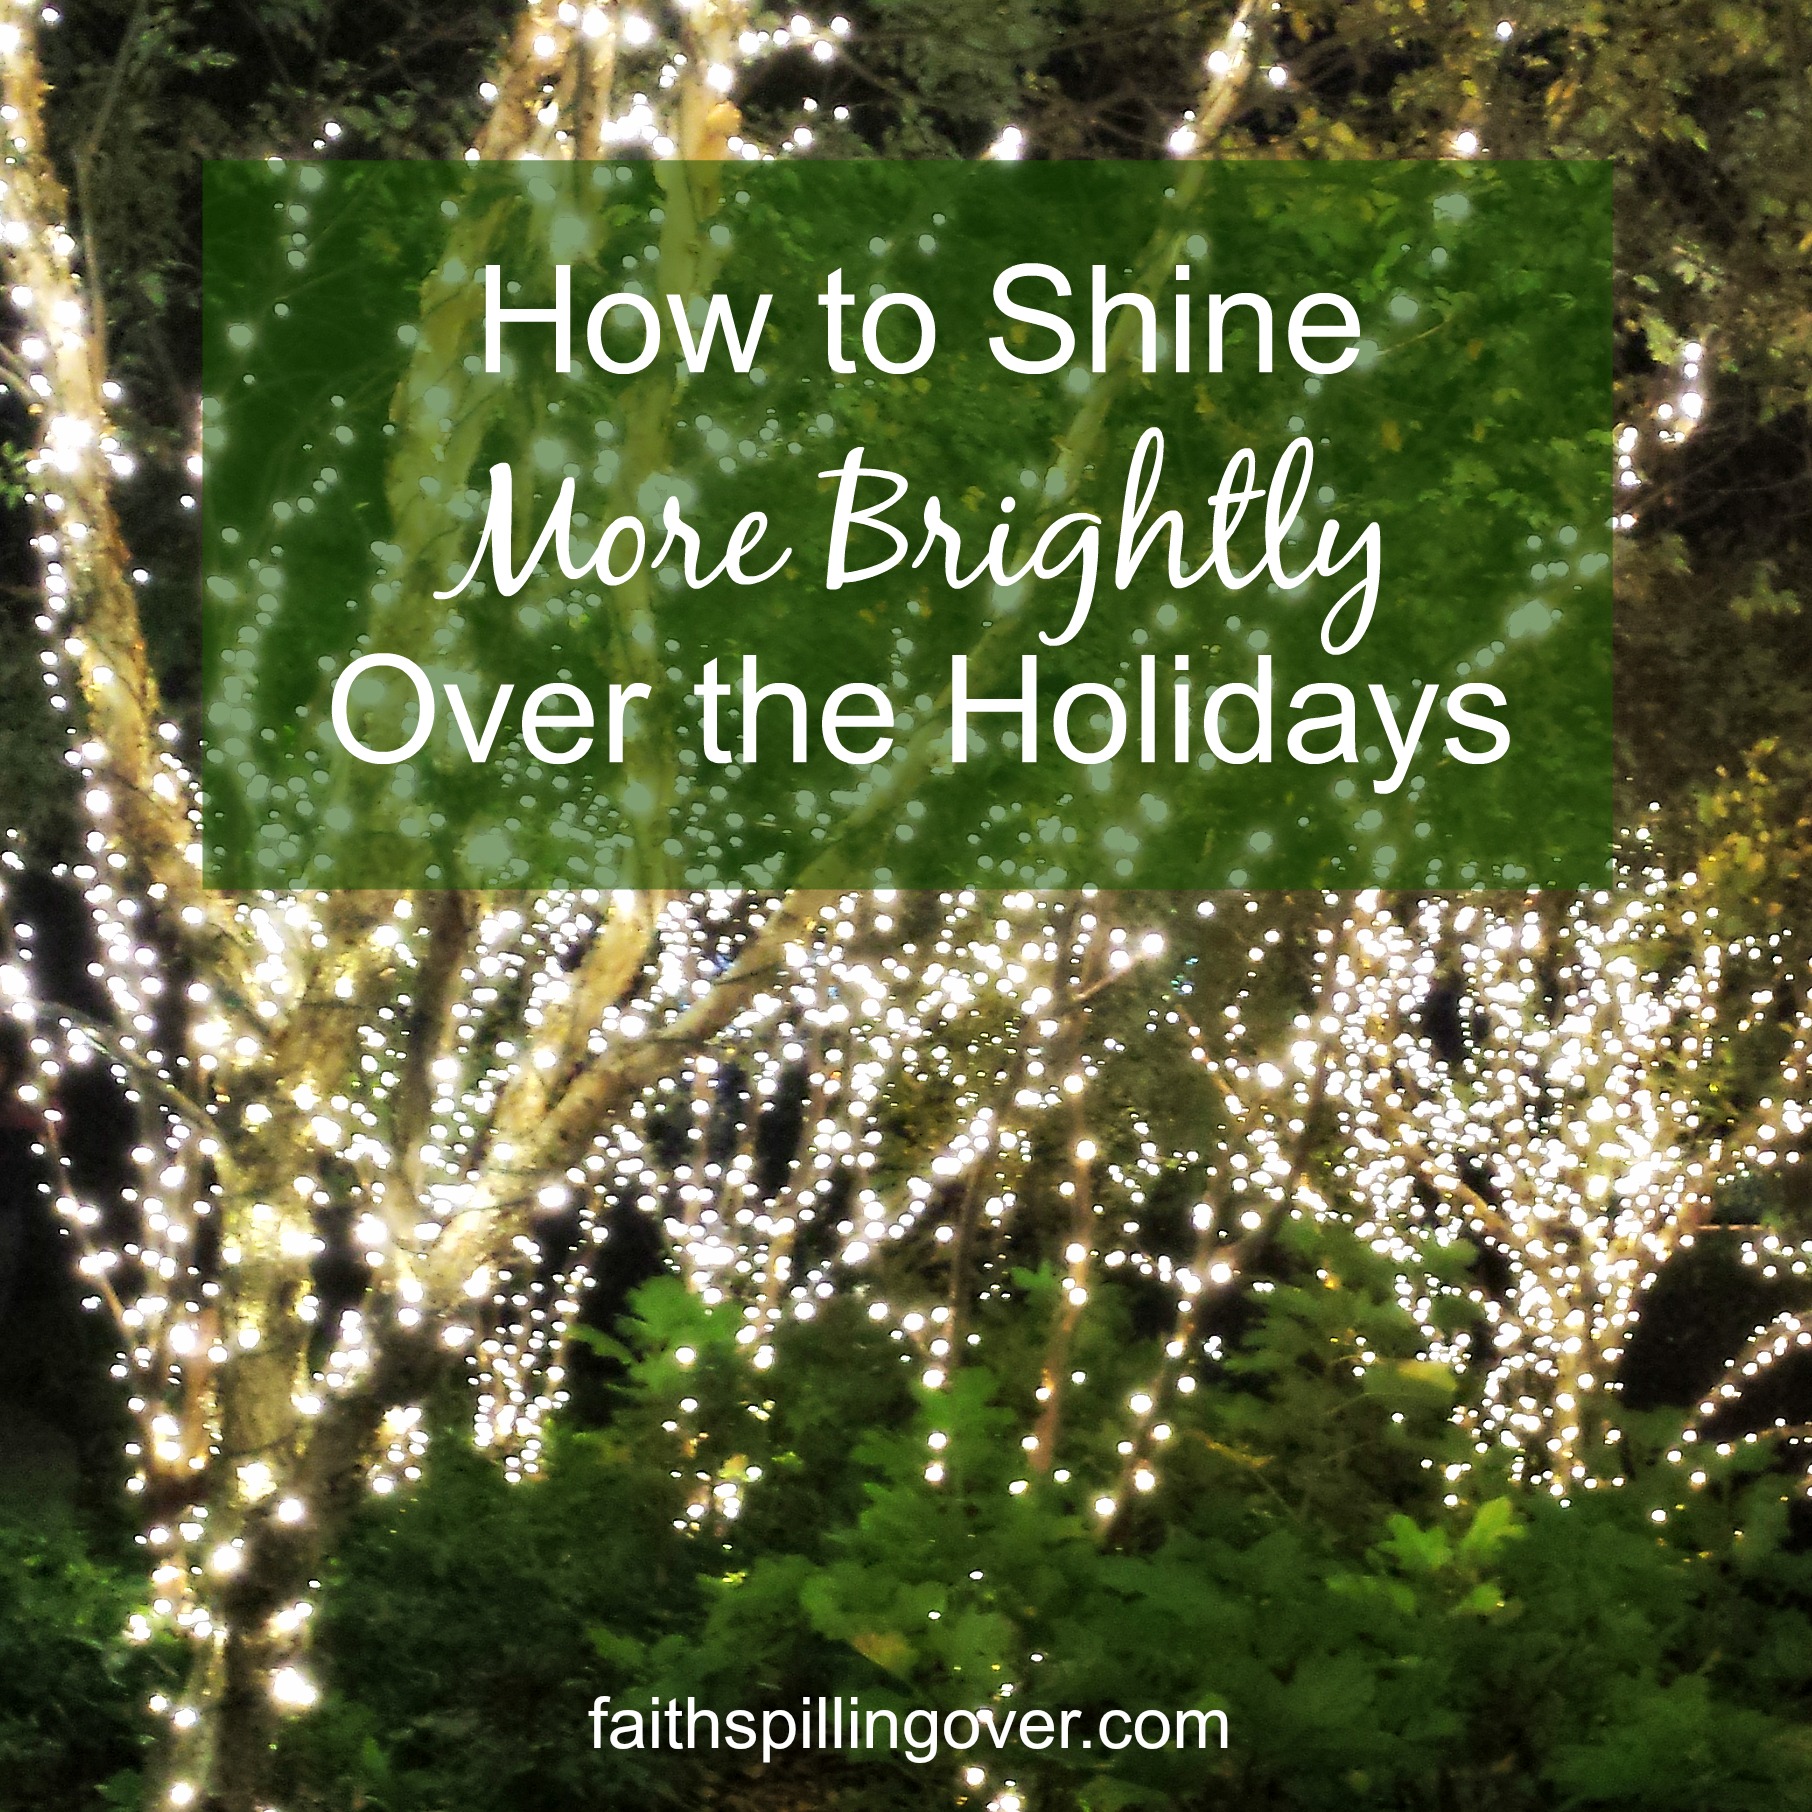 How to Shine More Brightly